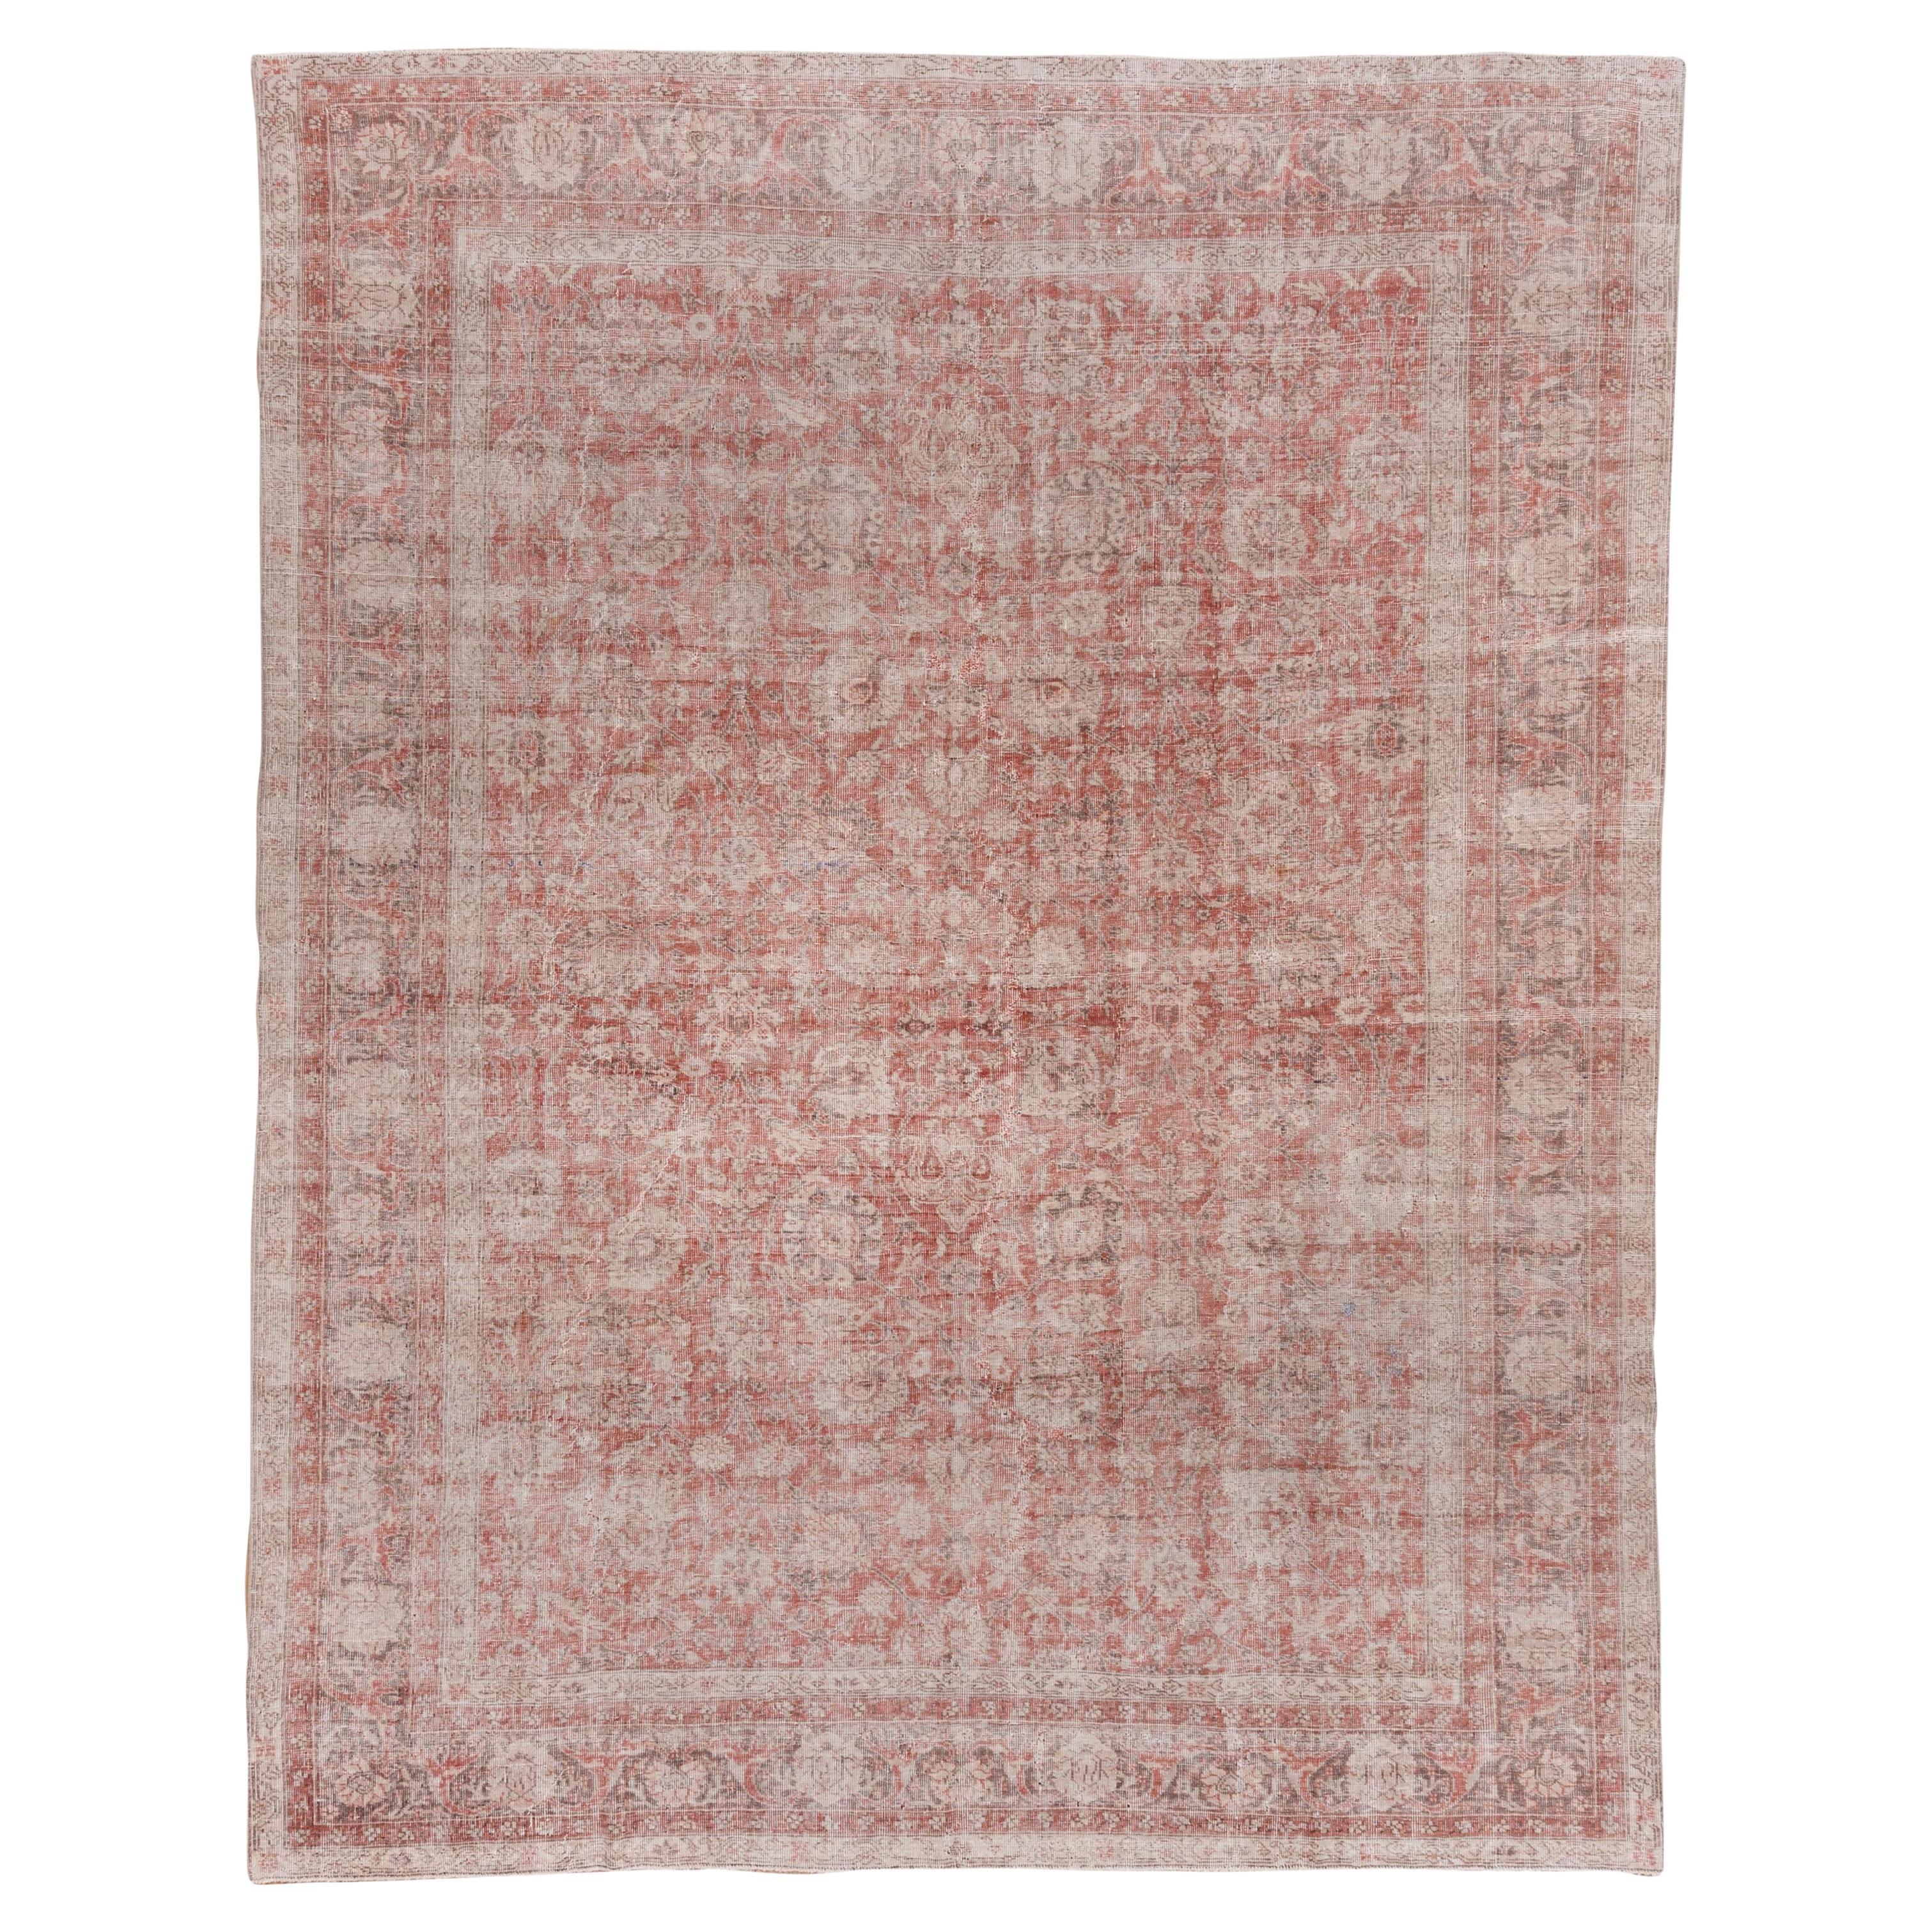 Shabby Chic Antique Turkish Oushak Rug, Light Red and Rust All-Over Field